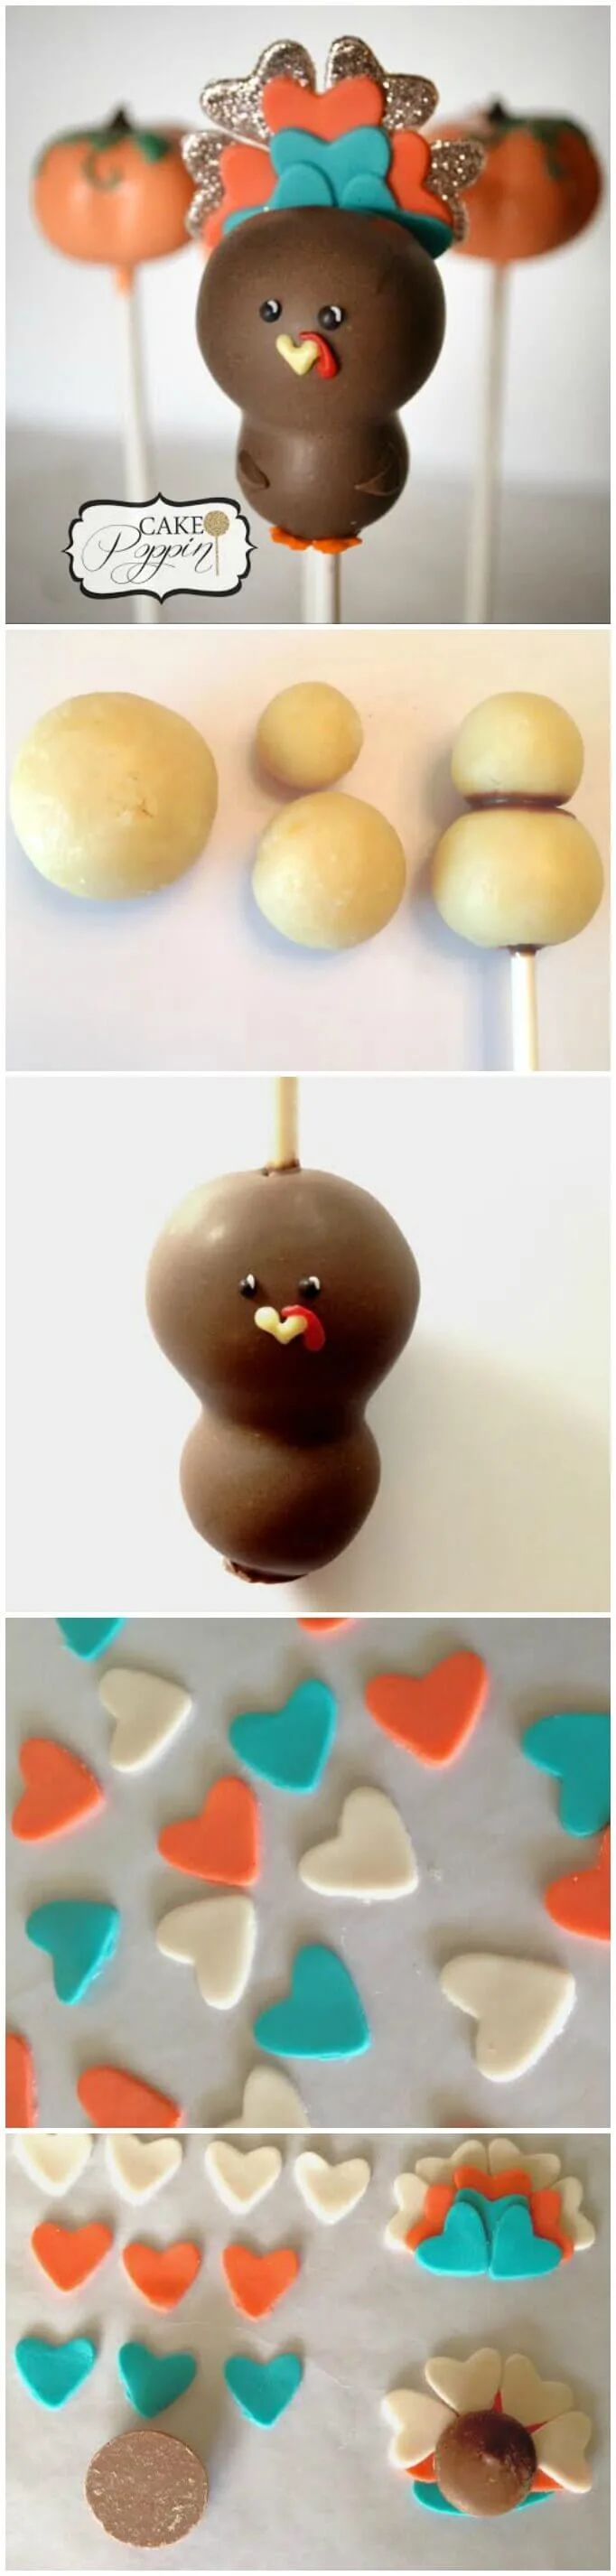 Gobble, gobble! This adorable Turkey Cake Pop wants to sit at your Thanksgiving dinner table. Learn how to make this Chubby Turkey now.